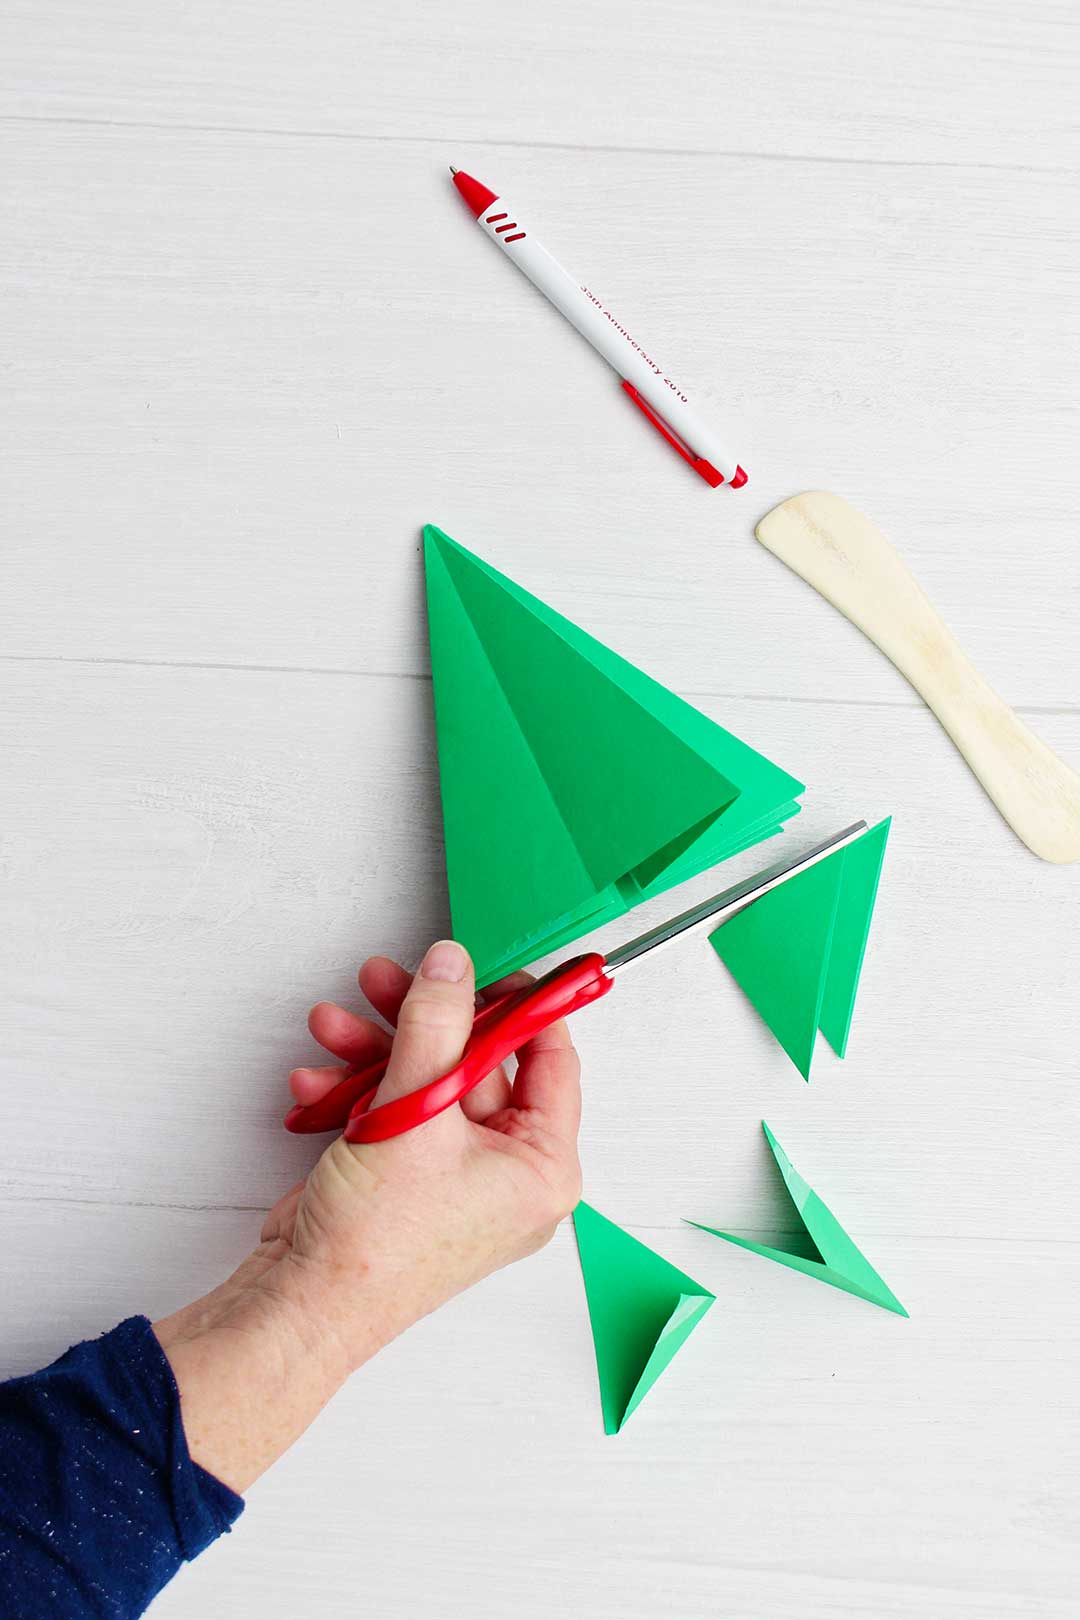 Hand trimming bottom of green origami tree with paper creaser and pen near by.